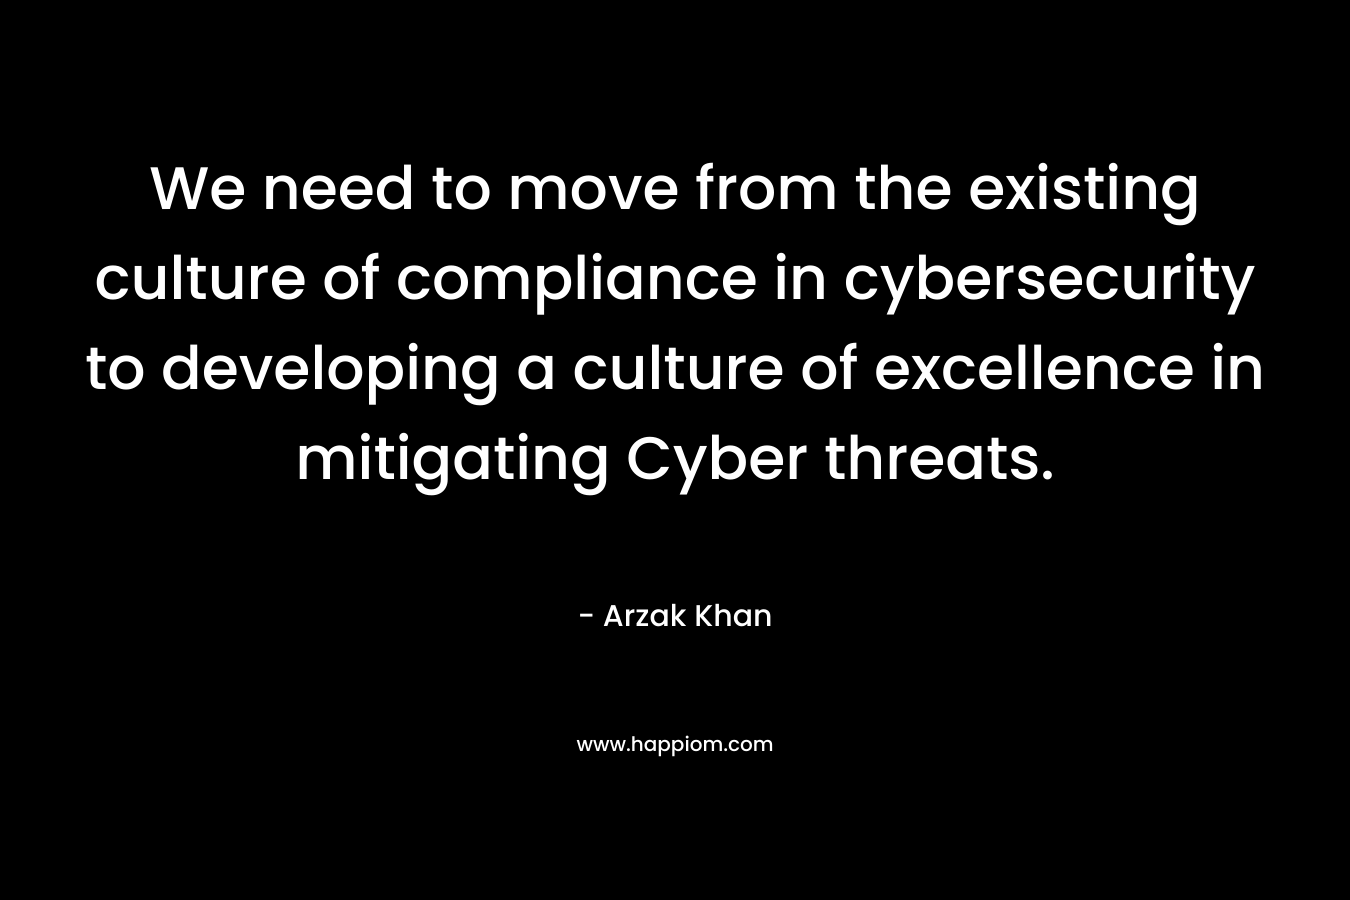 We need to move from the existing culture of compliance in cybersecurity to developing a culture of excellence in mitigating Cyber threats.